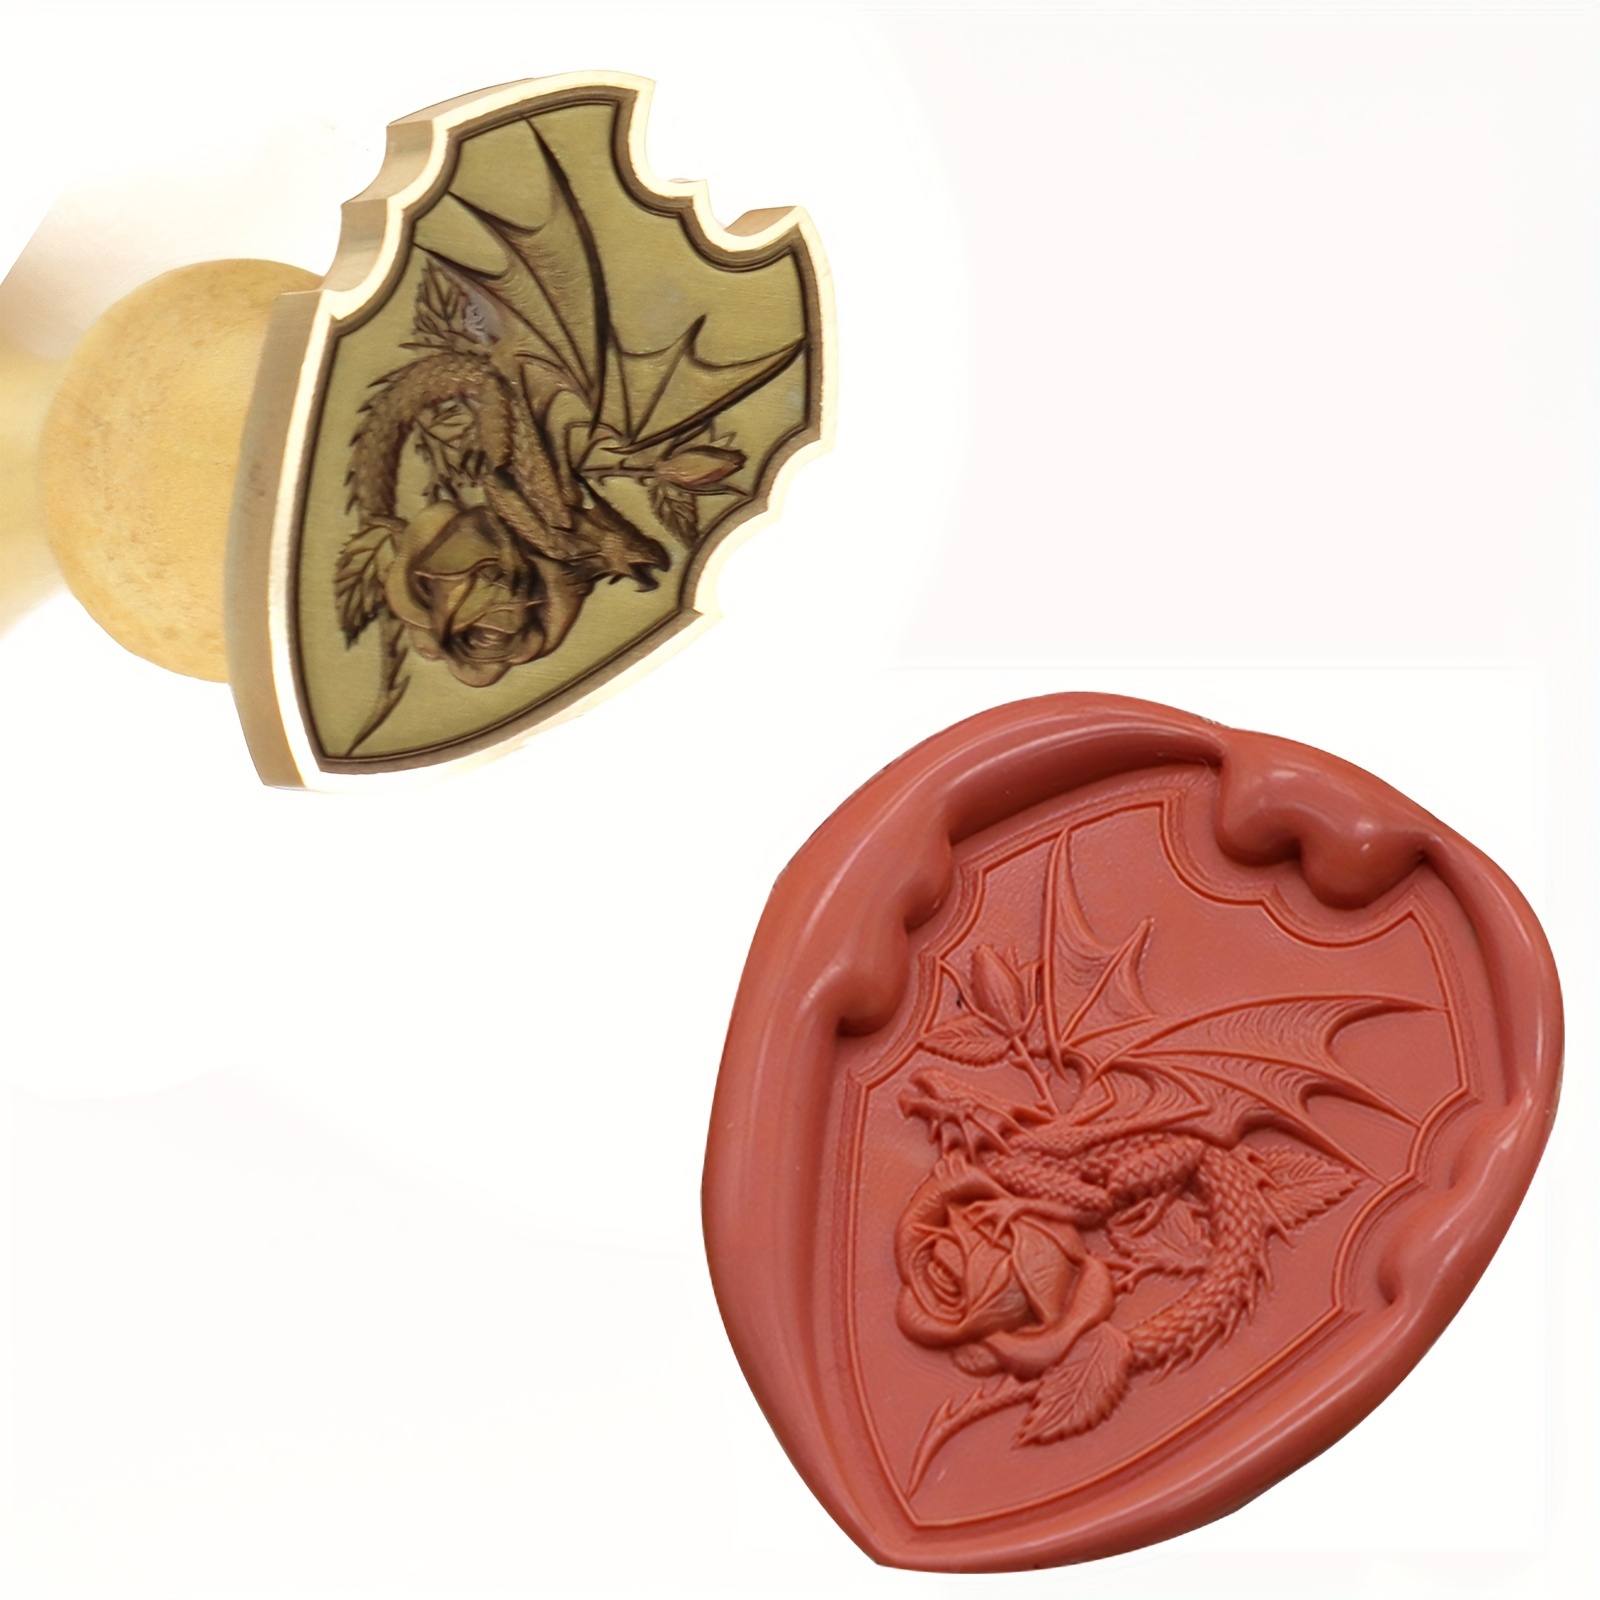 

Wax Seal Stamp Wax Seal Laser Engraving Wax Seal Stamps Beautifully Crafted Wax Stamp Suitable For Envelope Postcards, Invitations, Gift Packaging Sealed Wedding Wax Seal Stamp